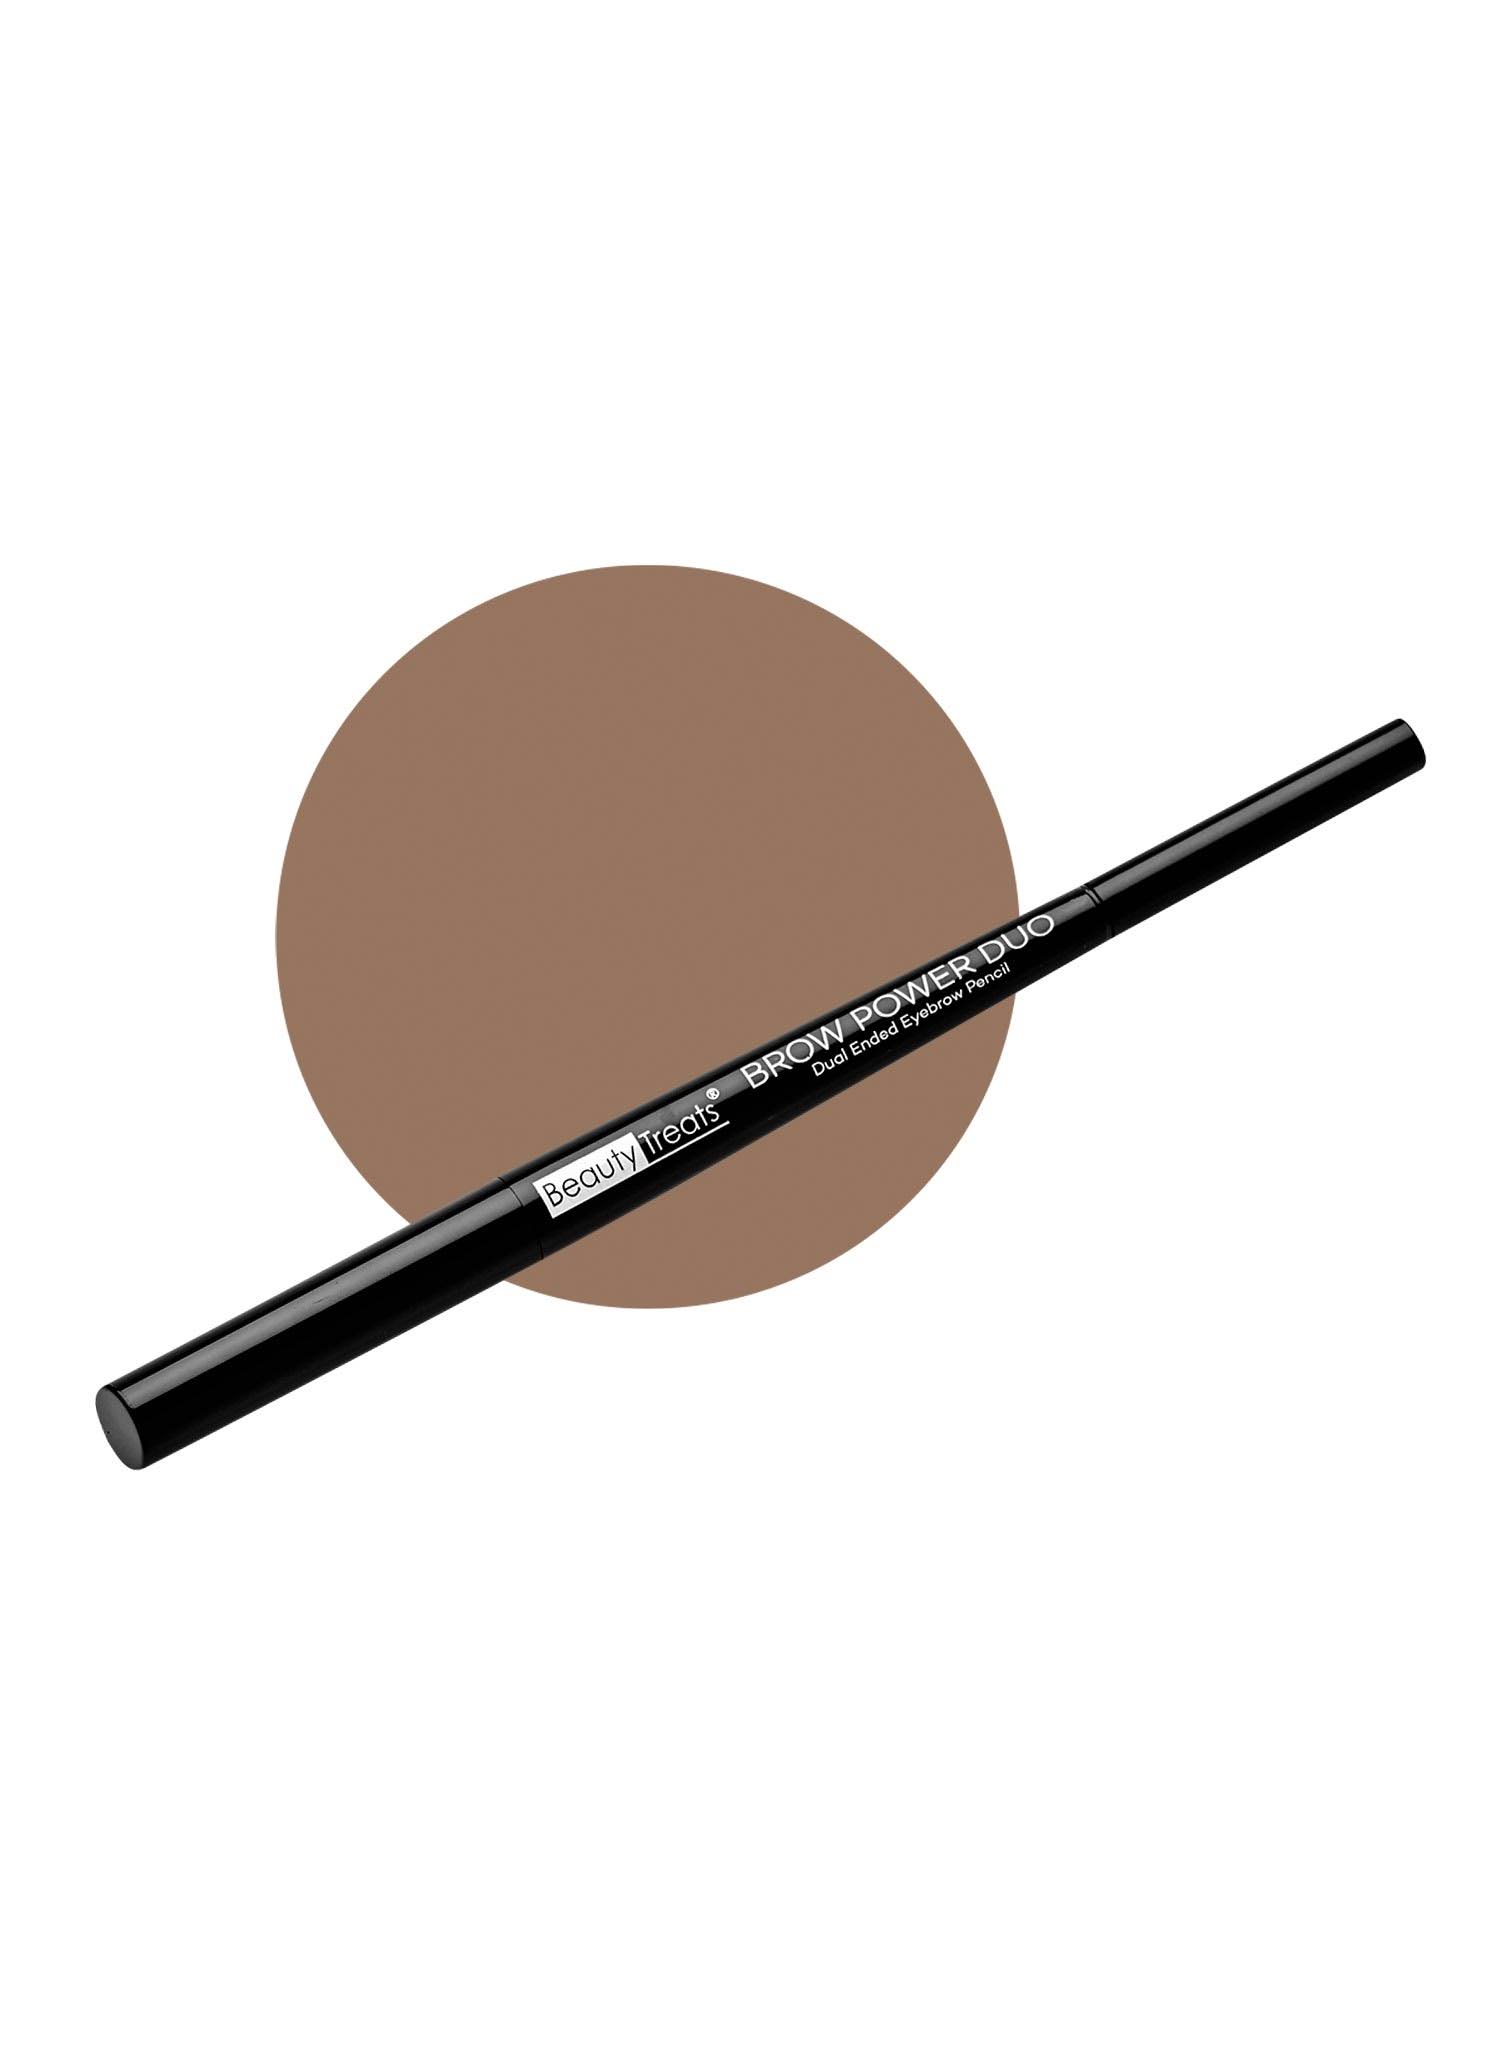 Beauty Treats Soft Brown Brow Power Duo Eyebrow Pencil One Size